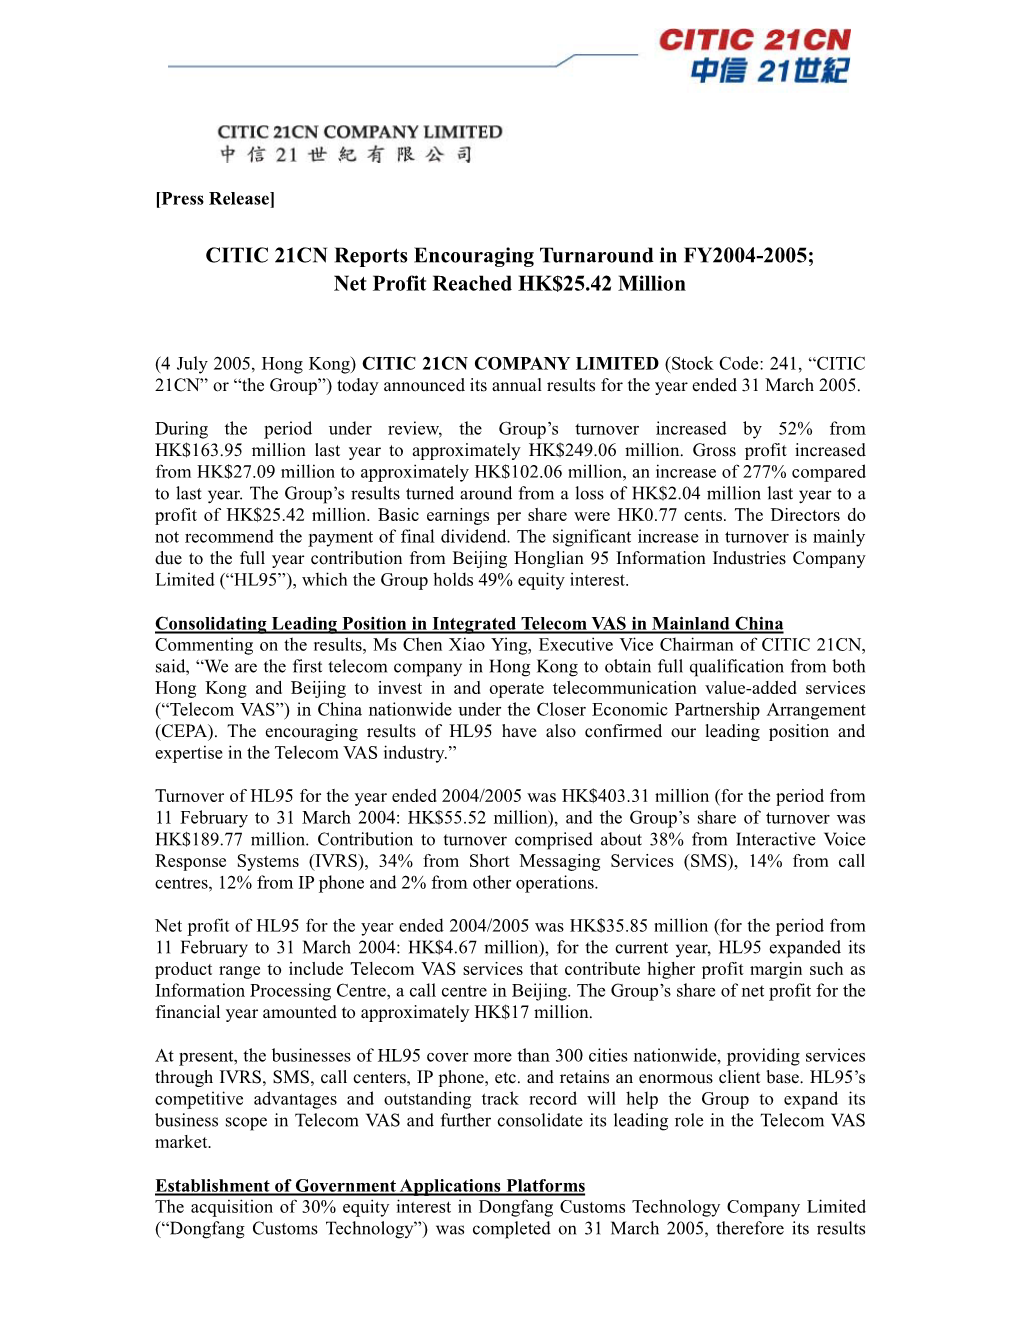 CITIC 21CN COMPANY LIMITED (Stock Code: 241, “CITIC 21CN” Or “The Group”) Today Announced Its Annual Results for the Year Ended 31 March 2005